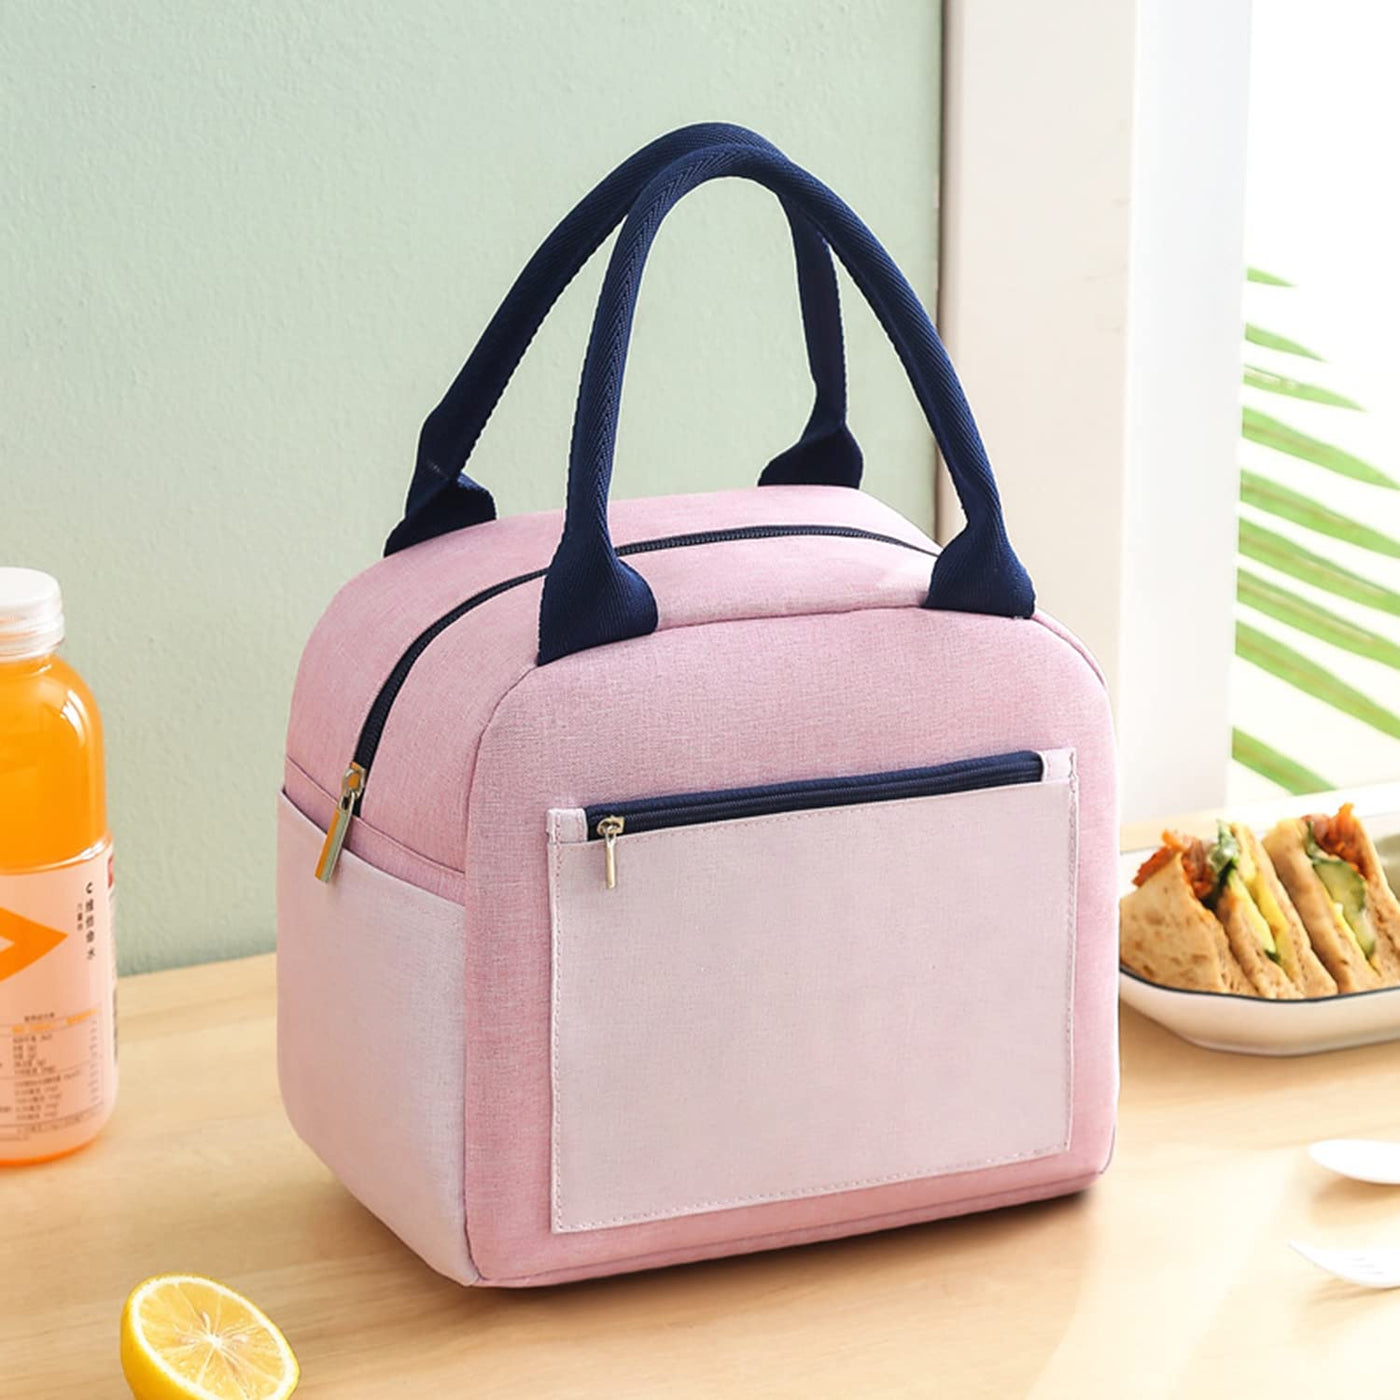 Lunch Tote Handbag with Aluminum Foil